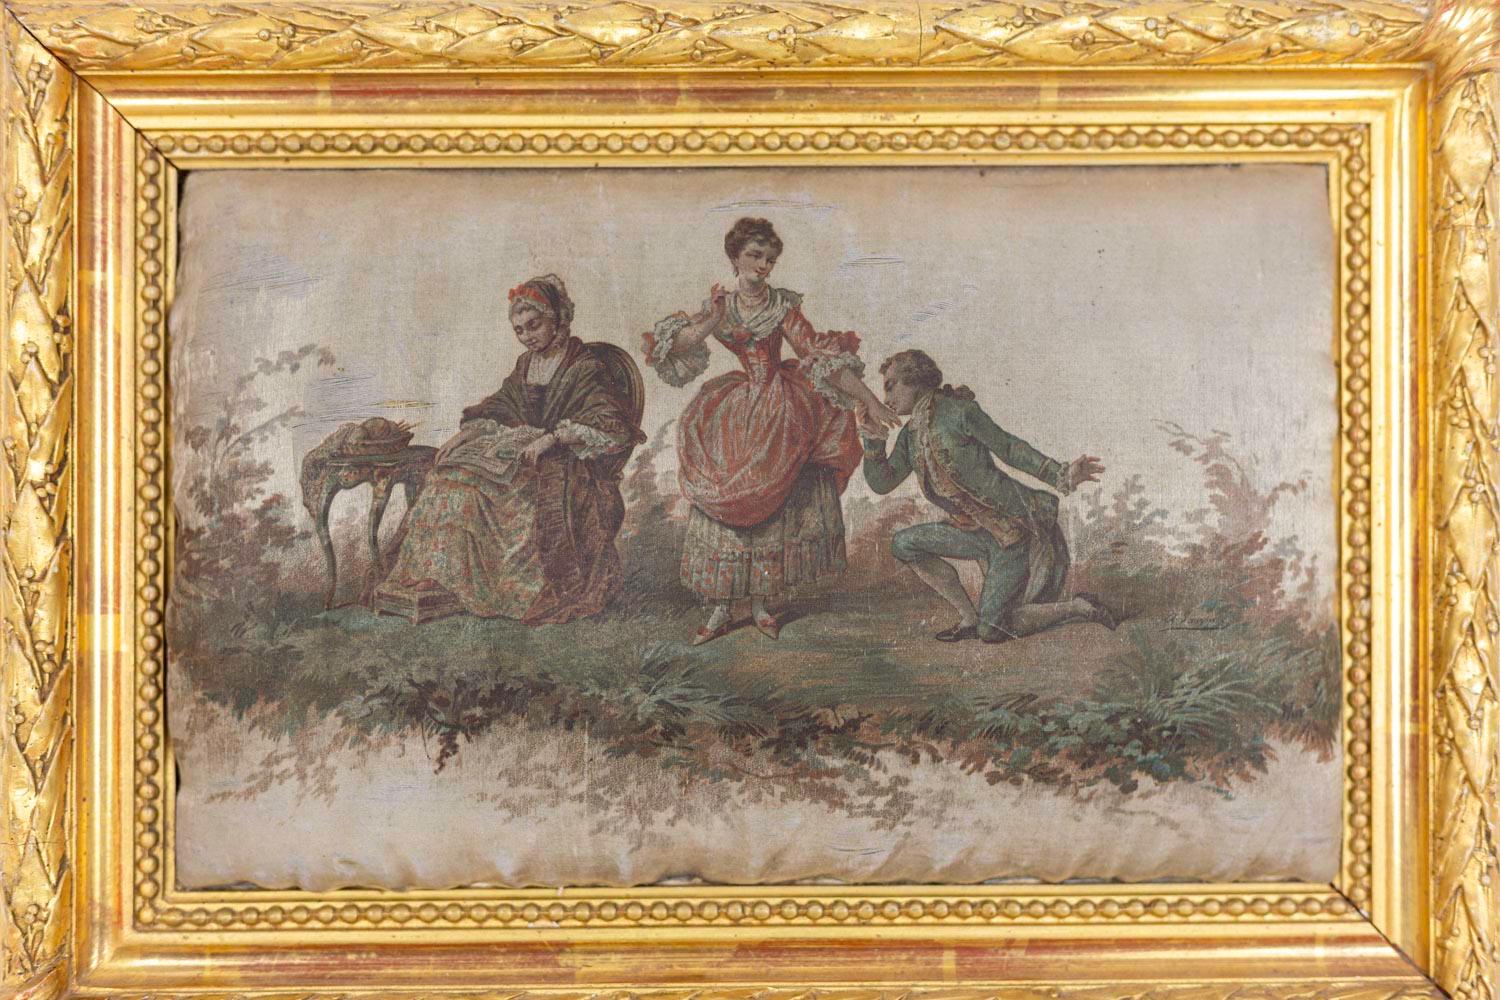 Small silk painting figuring a romantic scene in the 18th century style. A stand woman wearing a red and white dress reaches her hand to kiss to a kneeling man in front of her who wears a green jacket and trousers.
An older woman is sitting next to